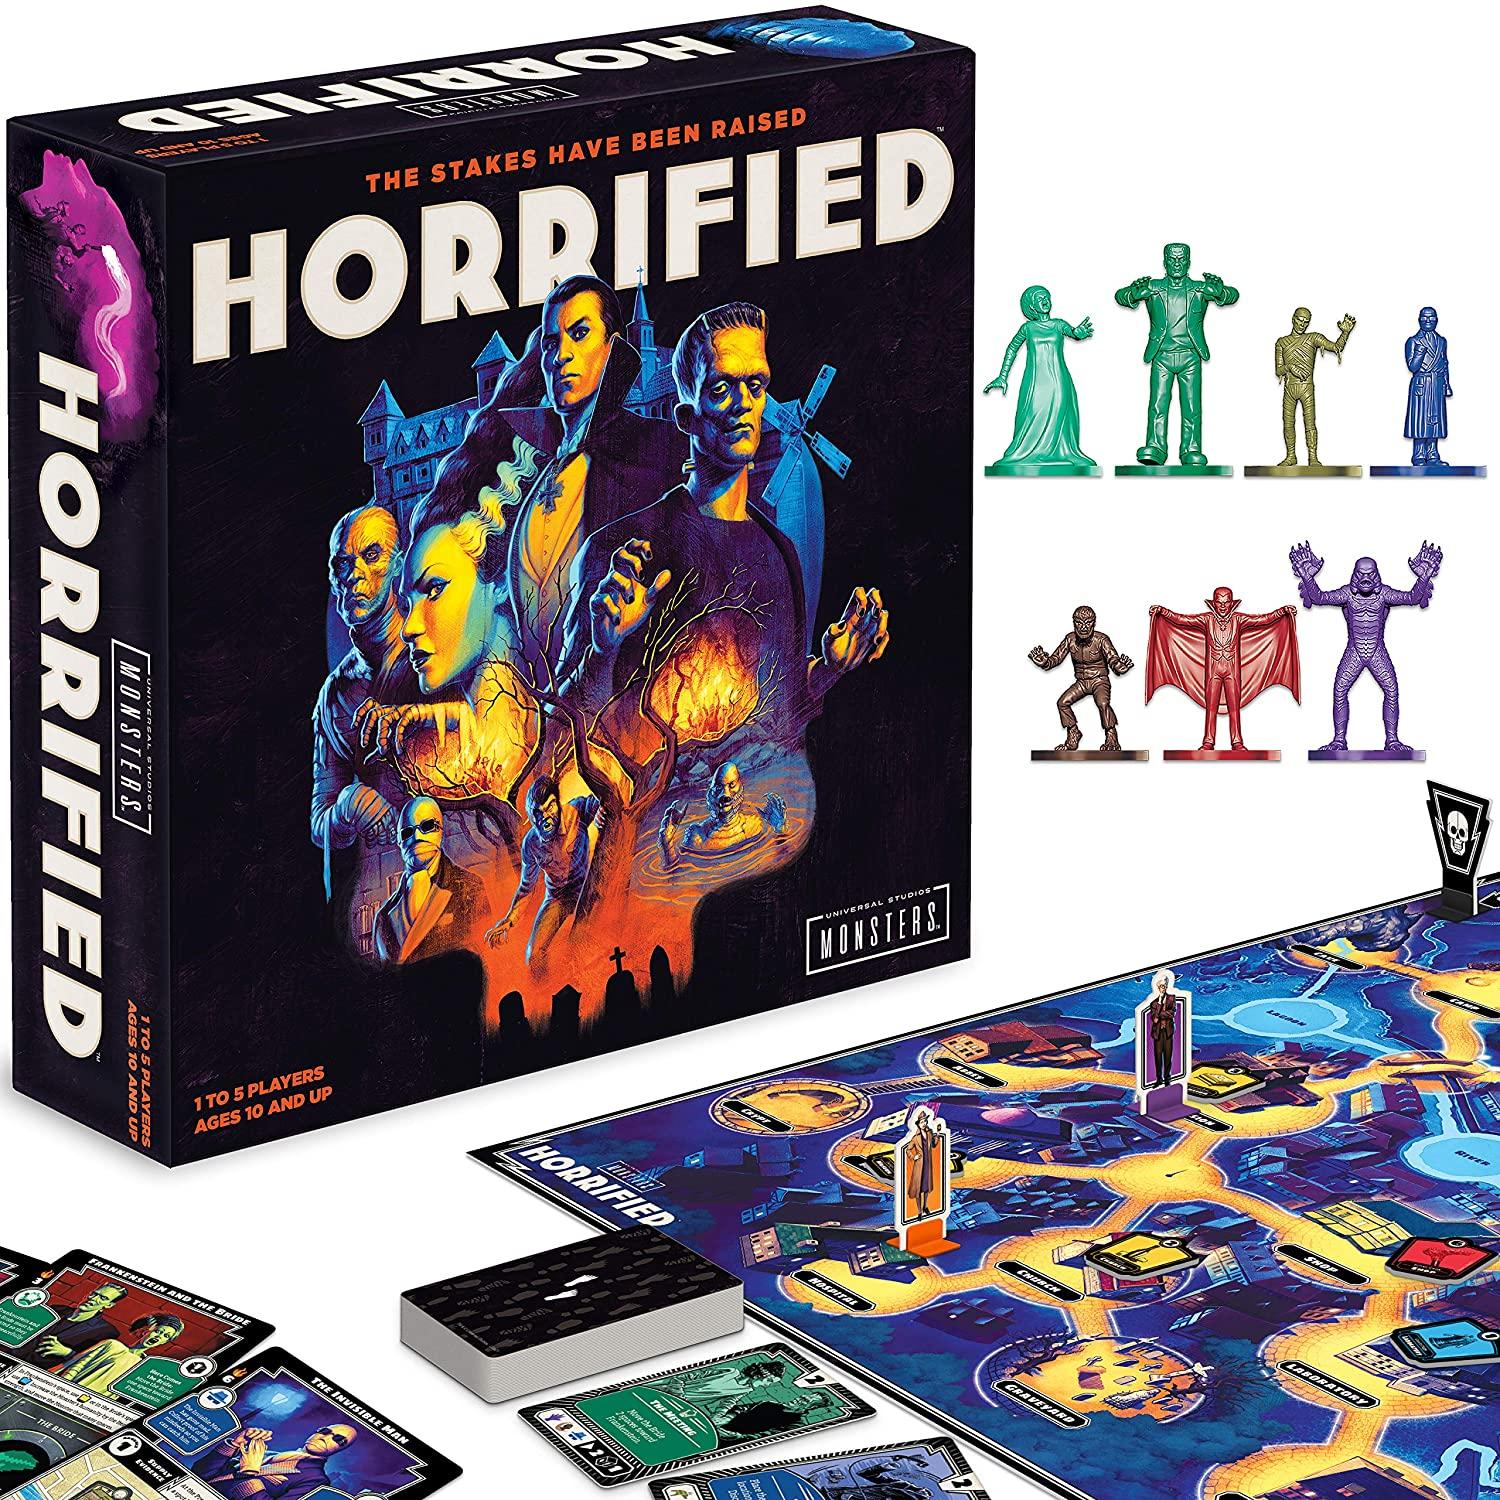 Ravensburger Horrified Universal Monsters Strategy Board Game for $23.99